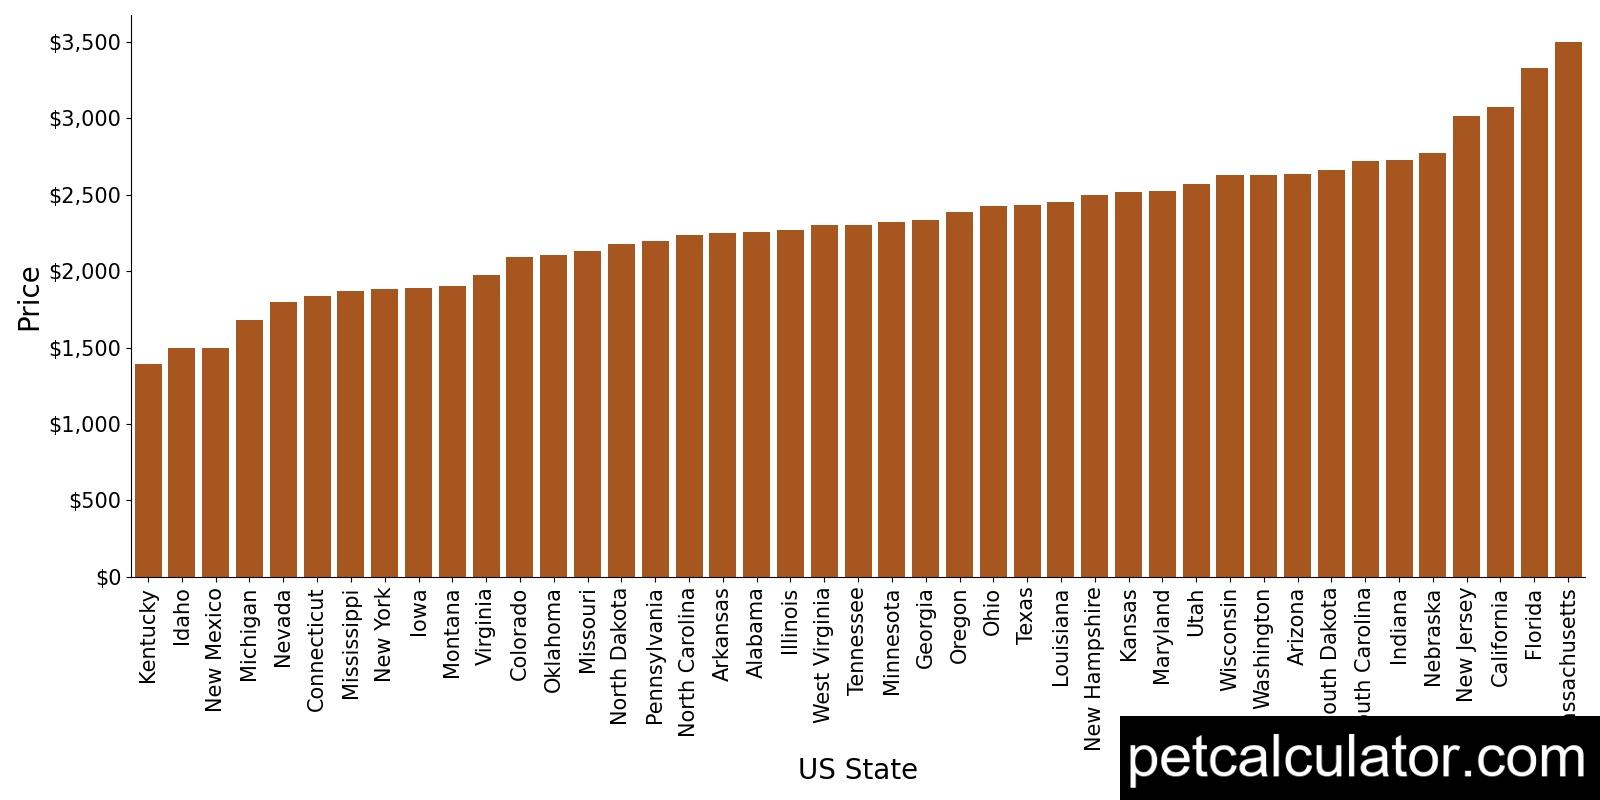 Price of Cavalier King Charles Spaniel by US State 